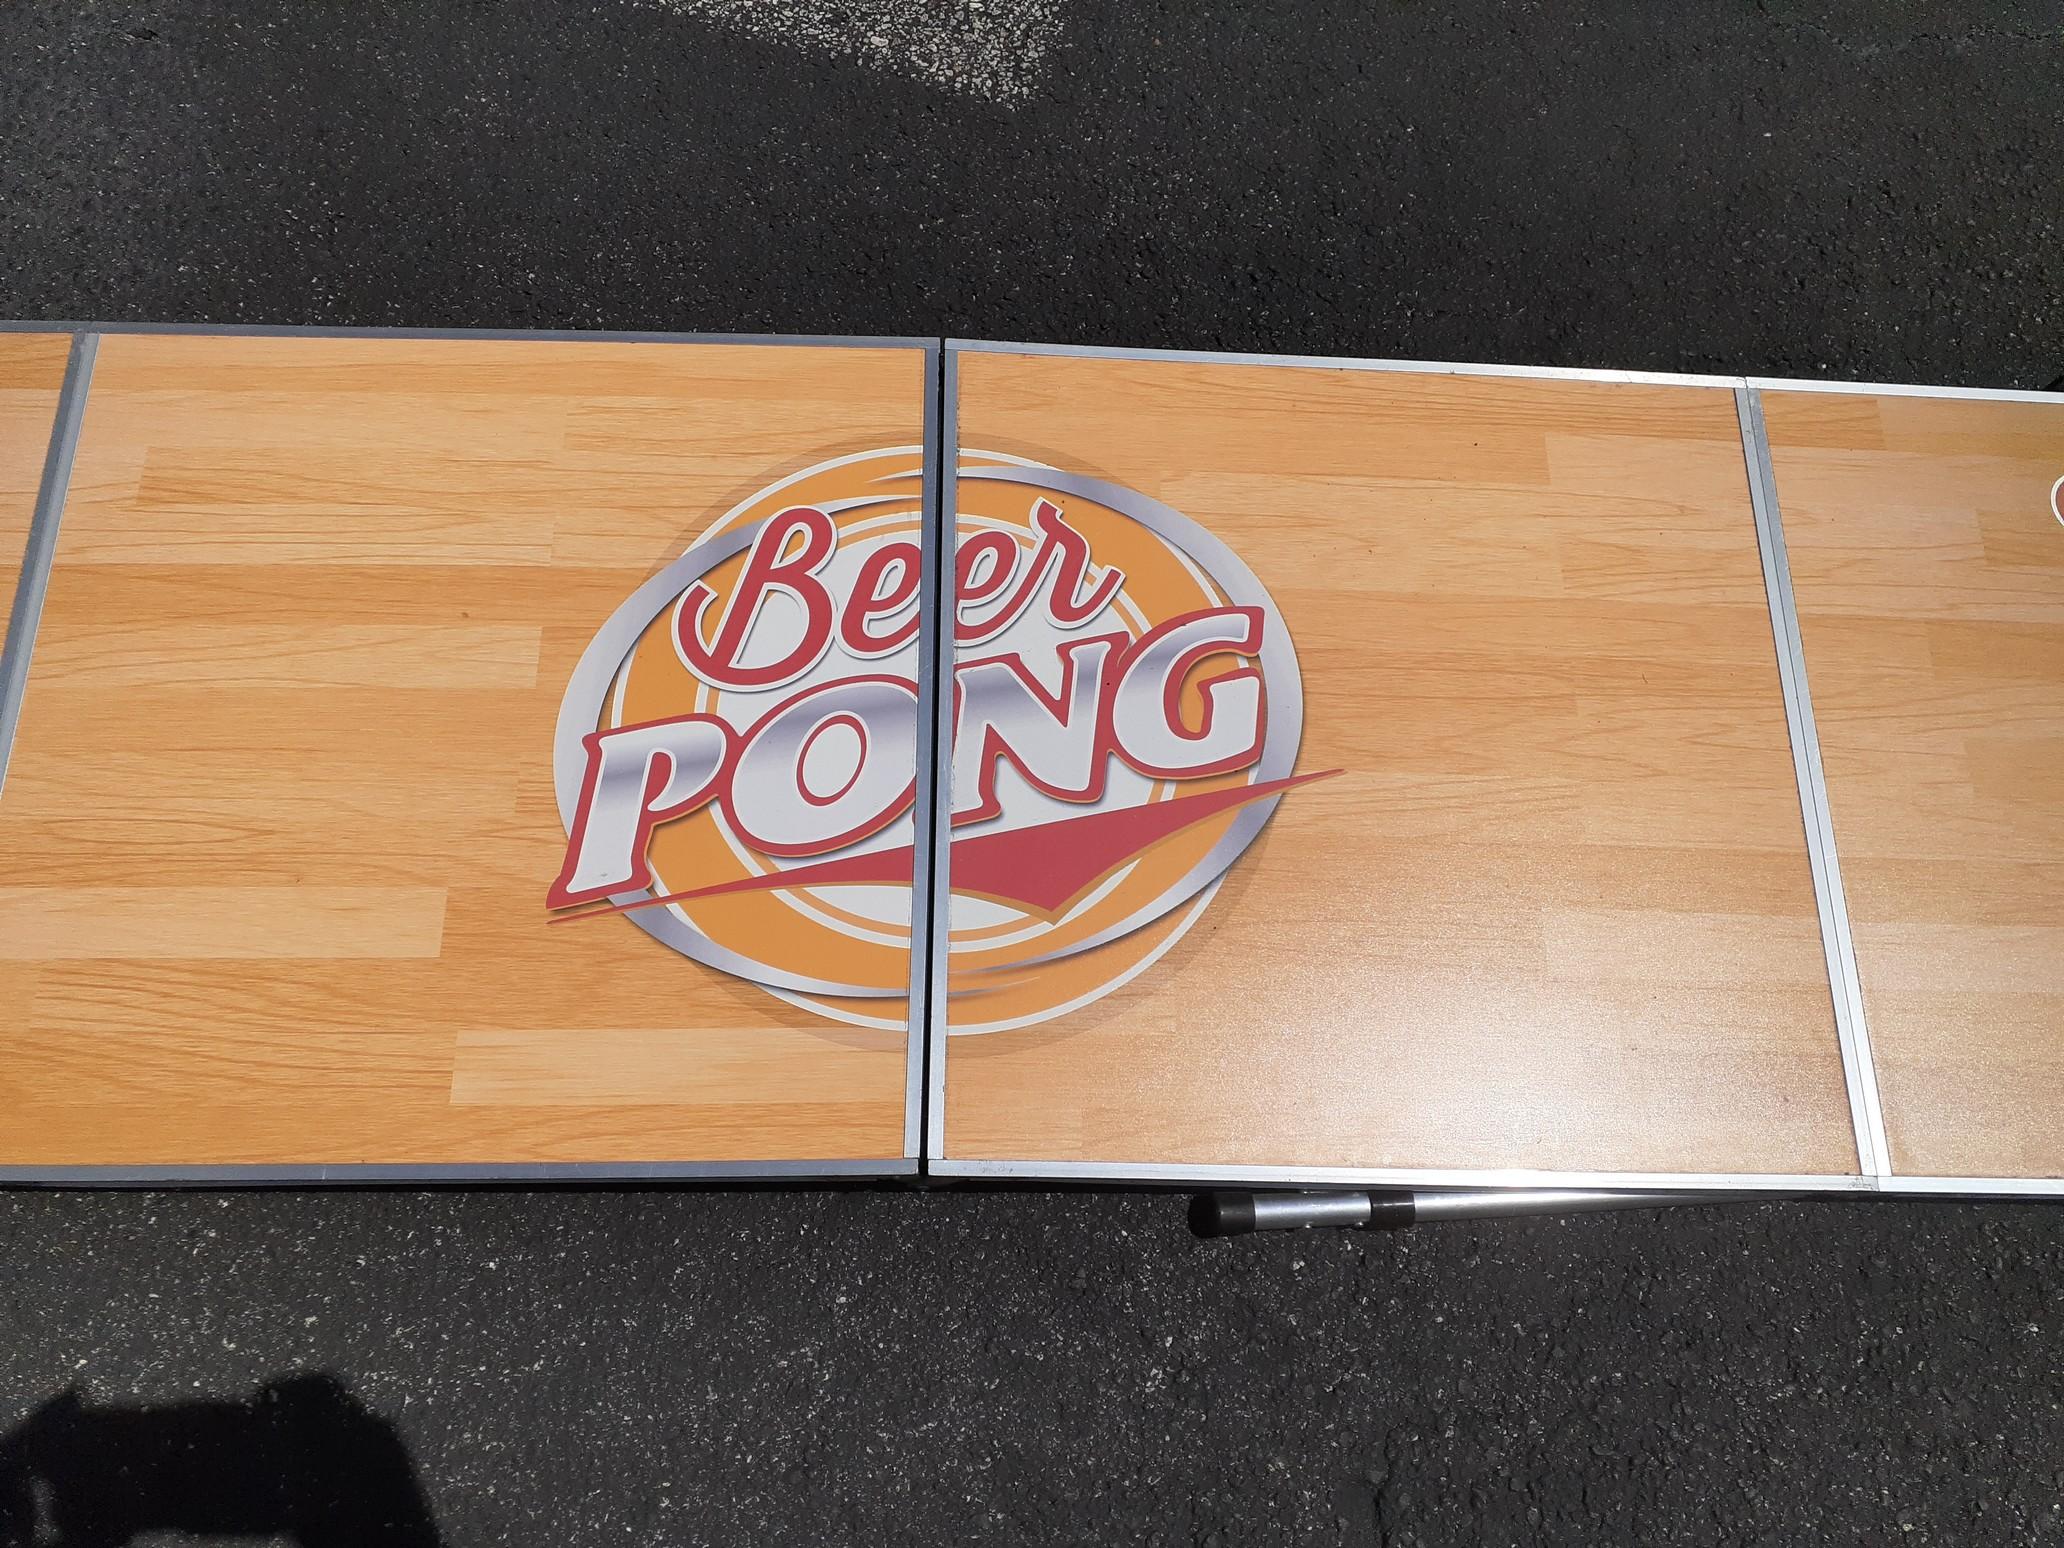 Beer Pong Metal Table - Portable - Complete with one leg off - 95 inches